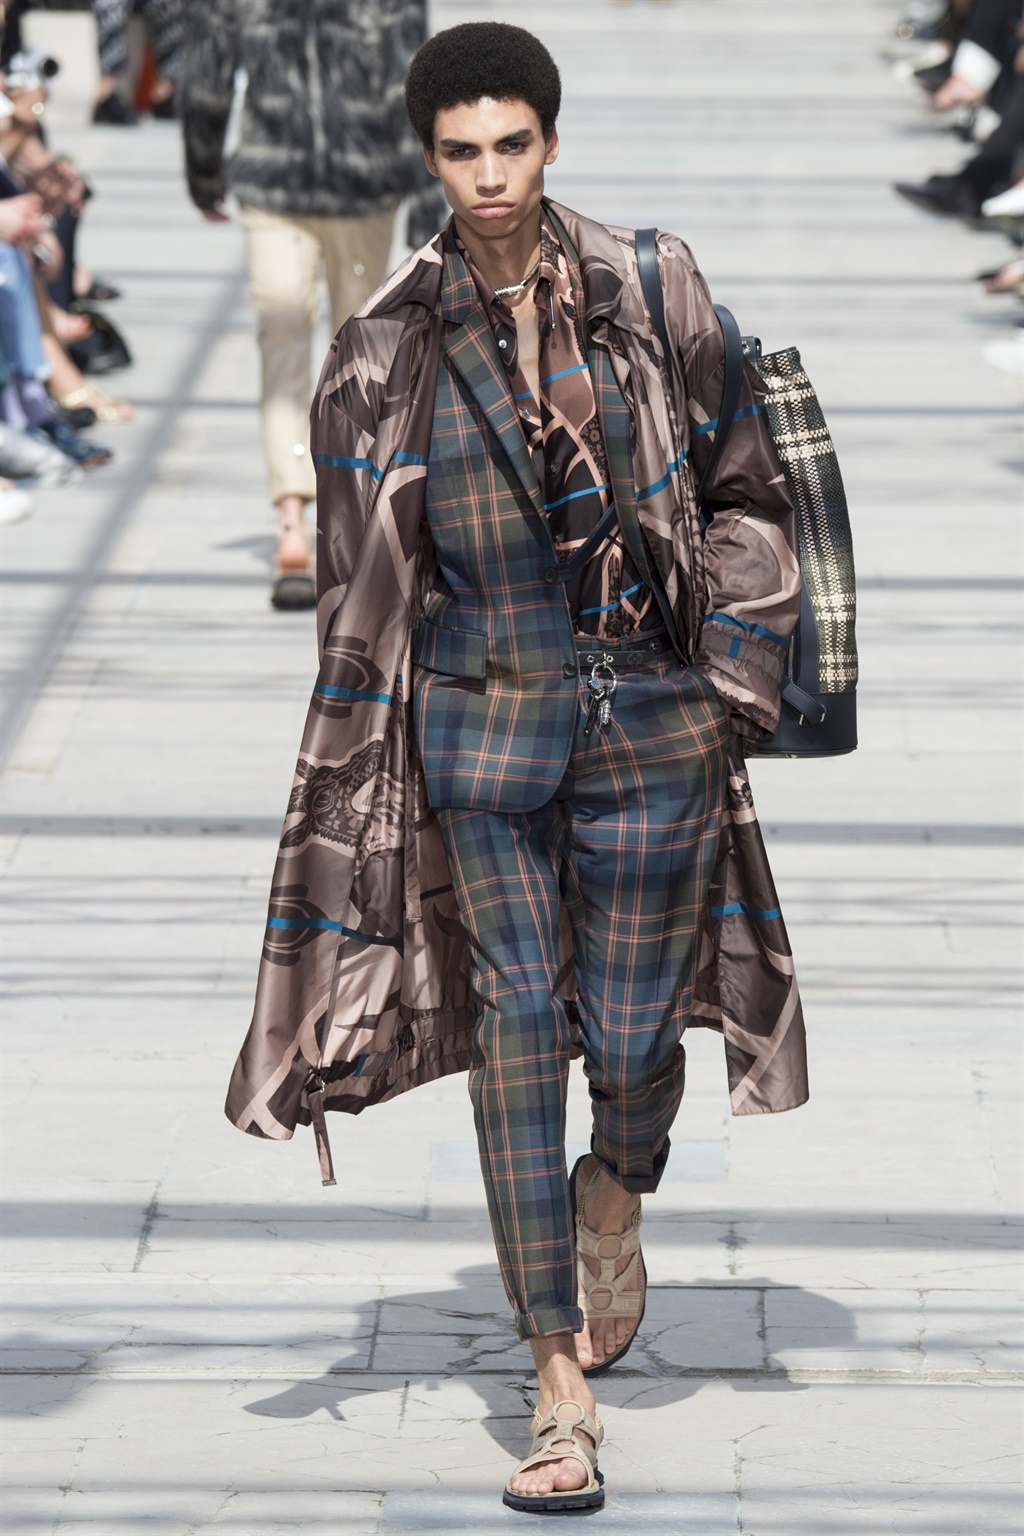 Louis Vuitton wants to wrap you up in a blanket | City Press